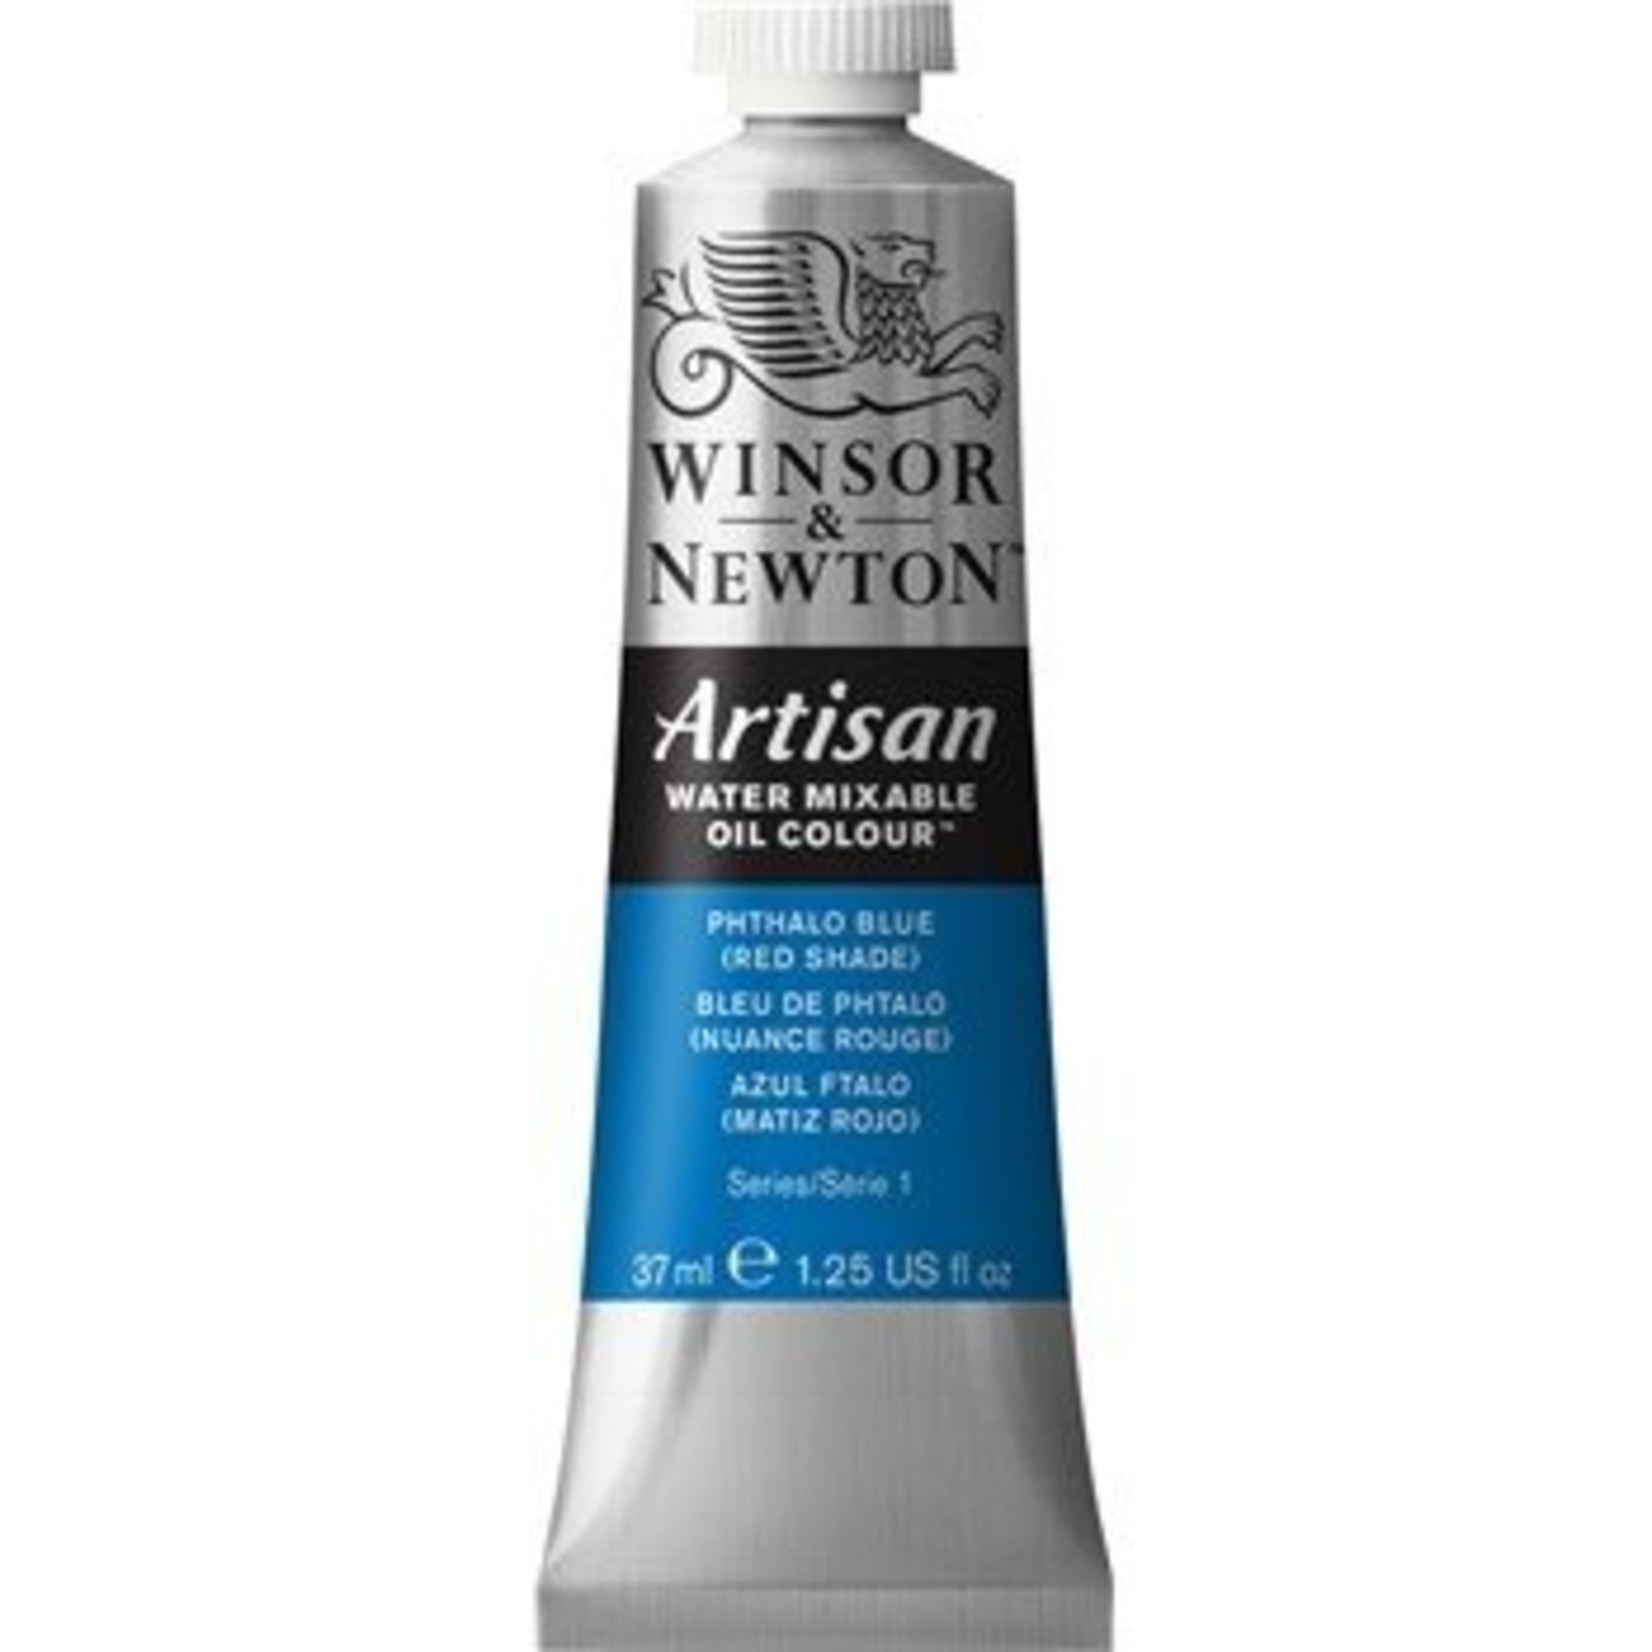 WINSOR NEWTON WINSOR & NEWTON ARTISAN WATER MIXABLE OIL 37ML PHTHALO BLUE  RED SHADE